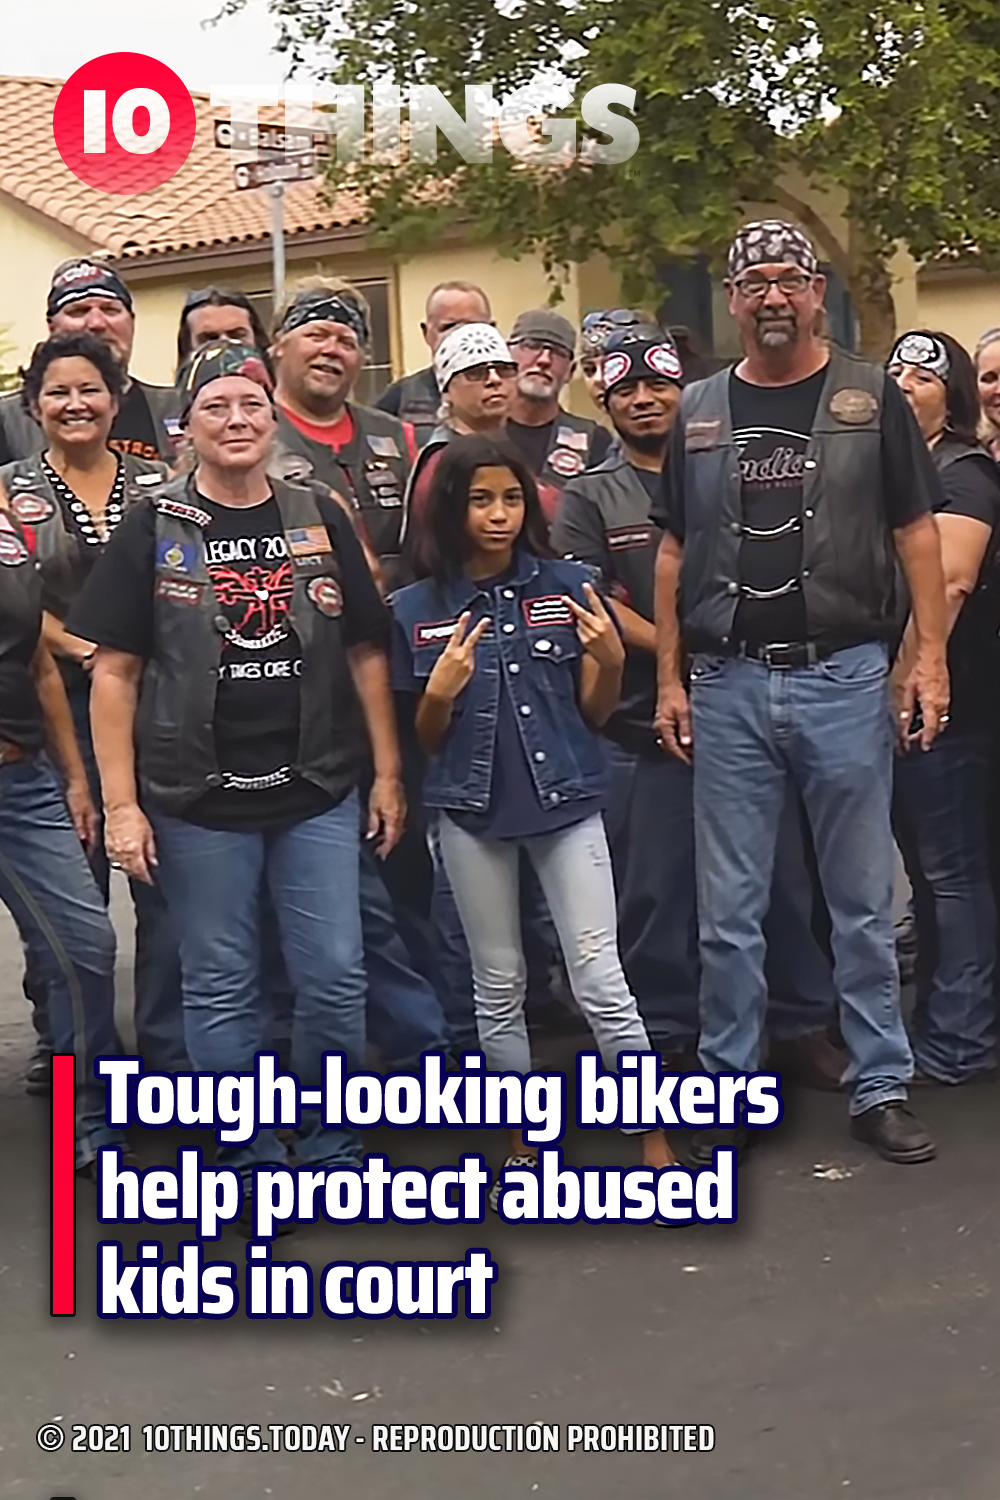 Tough-looking bikers help protect abused kids in court